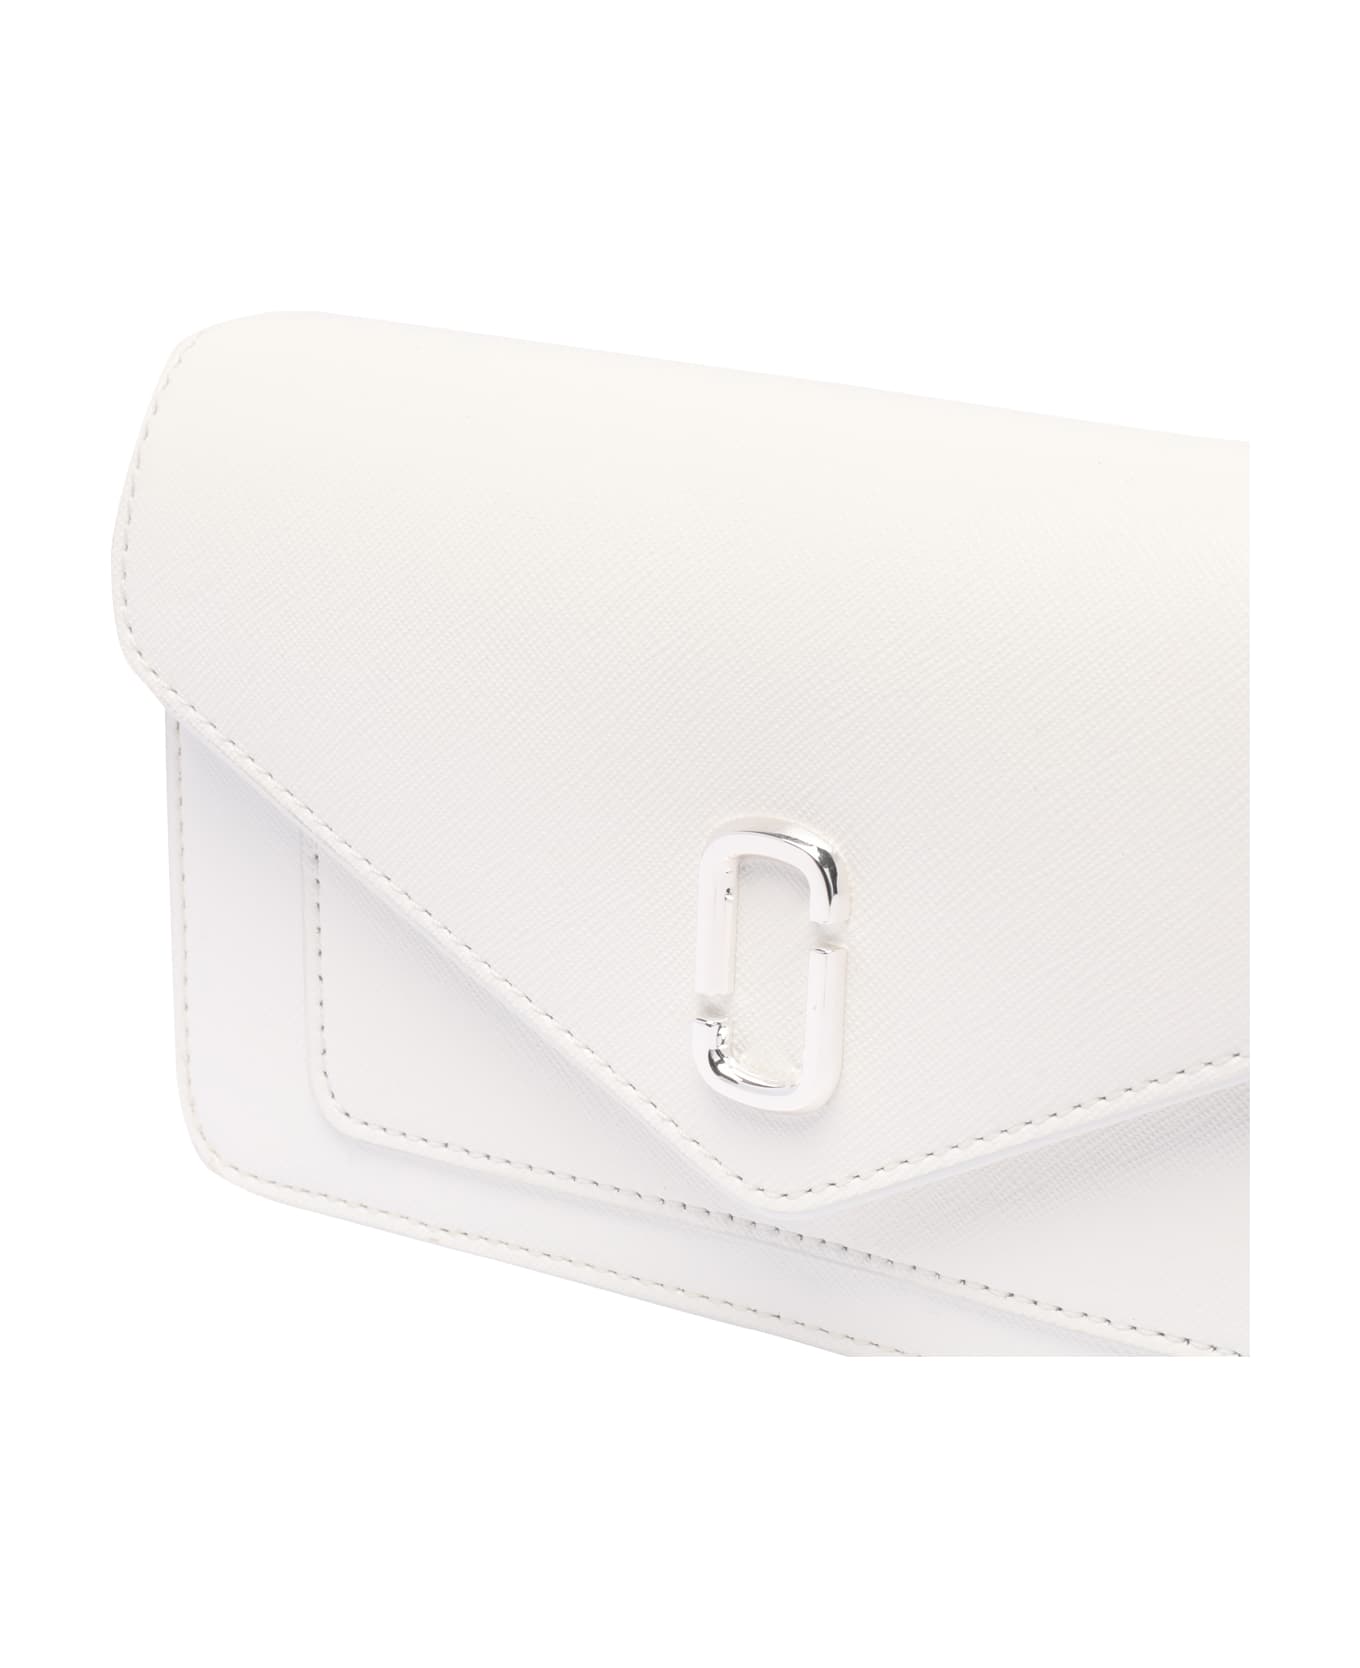 Marc Jacobs The Longshot Chain Wallet - White